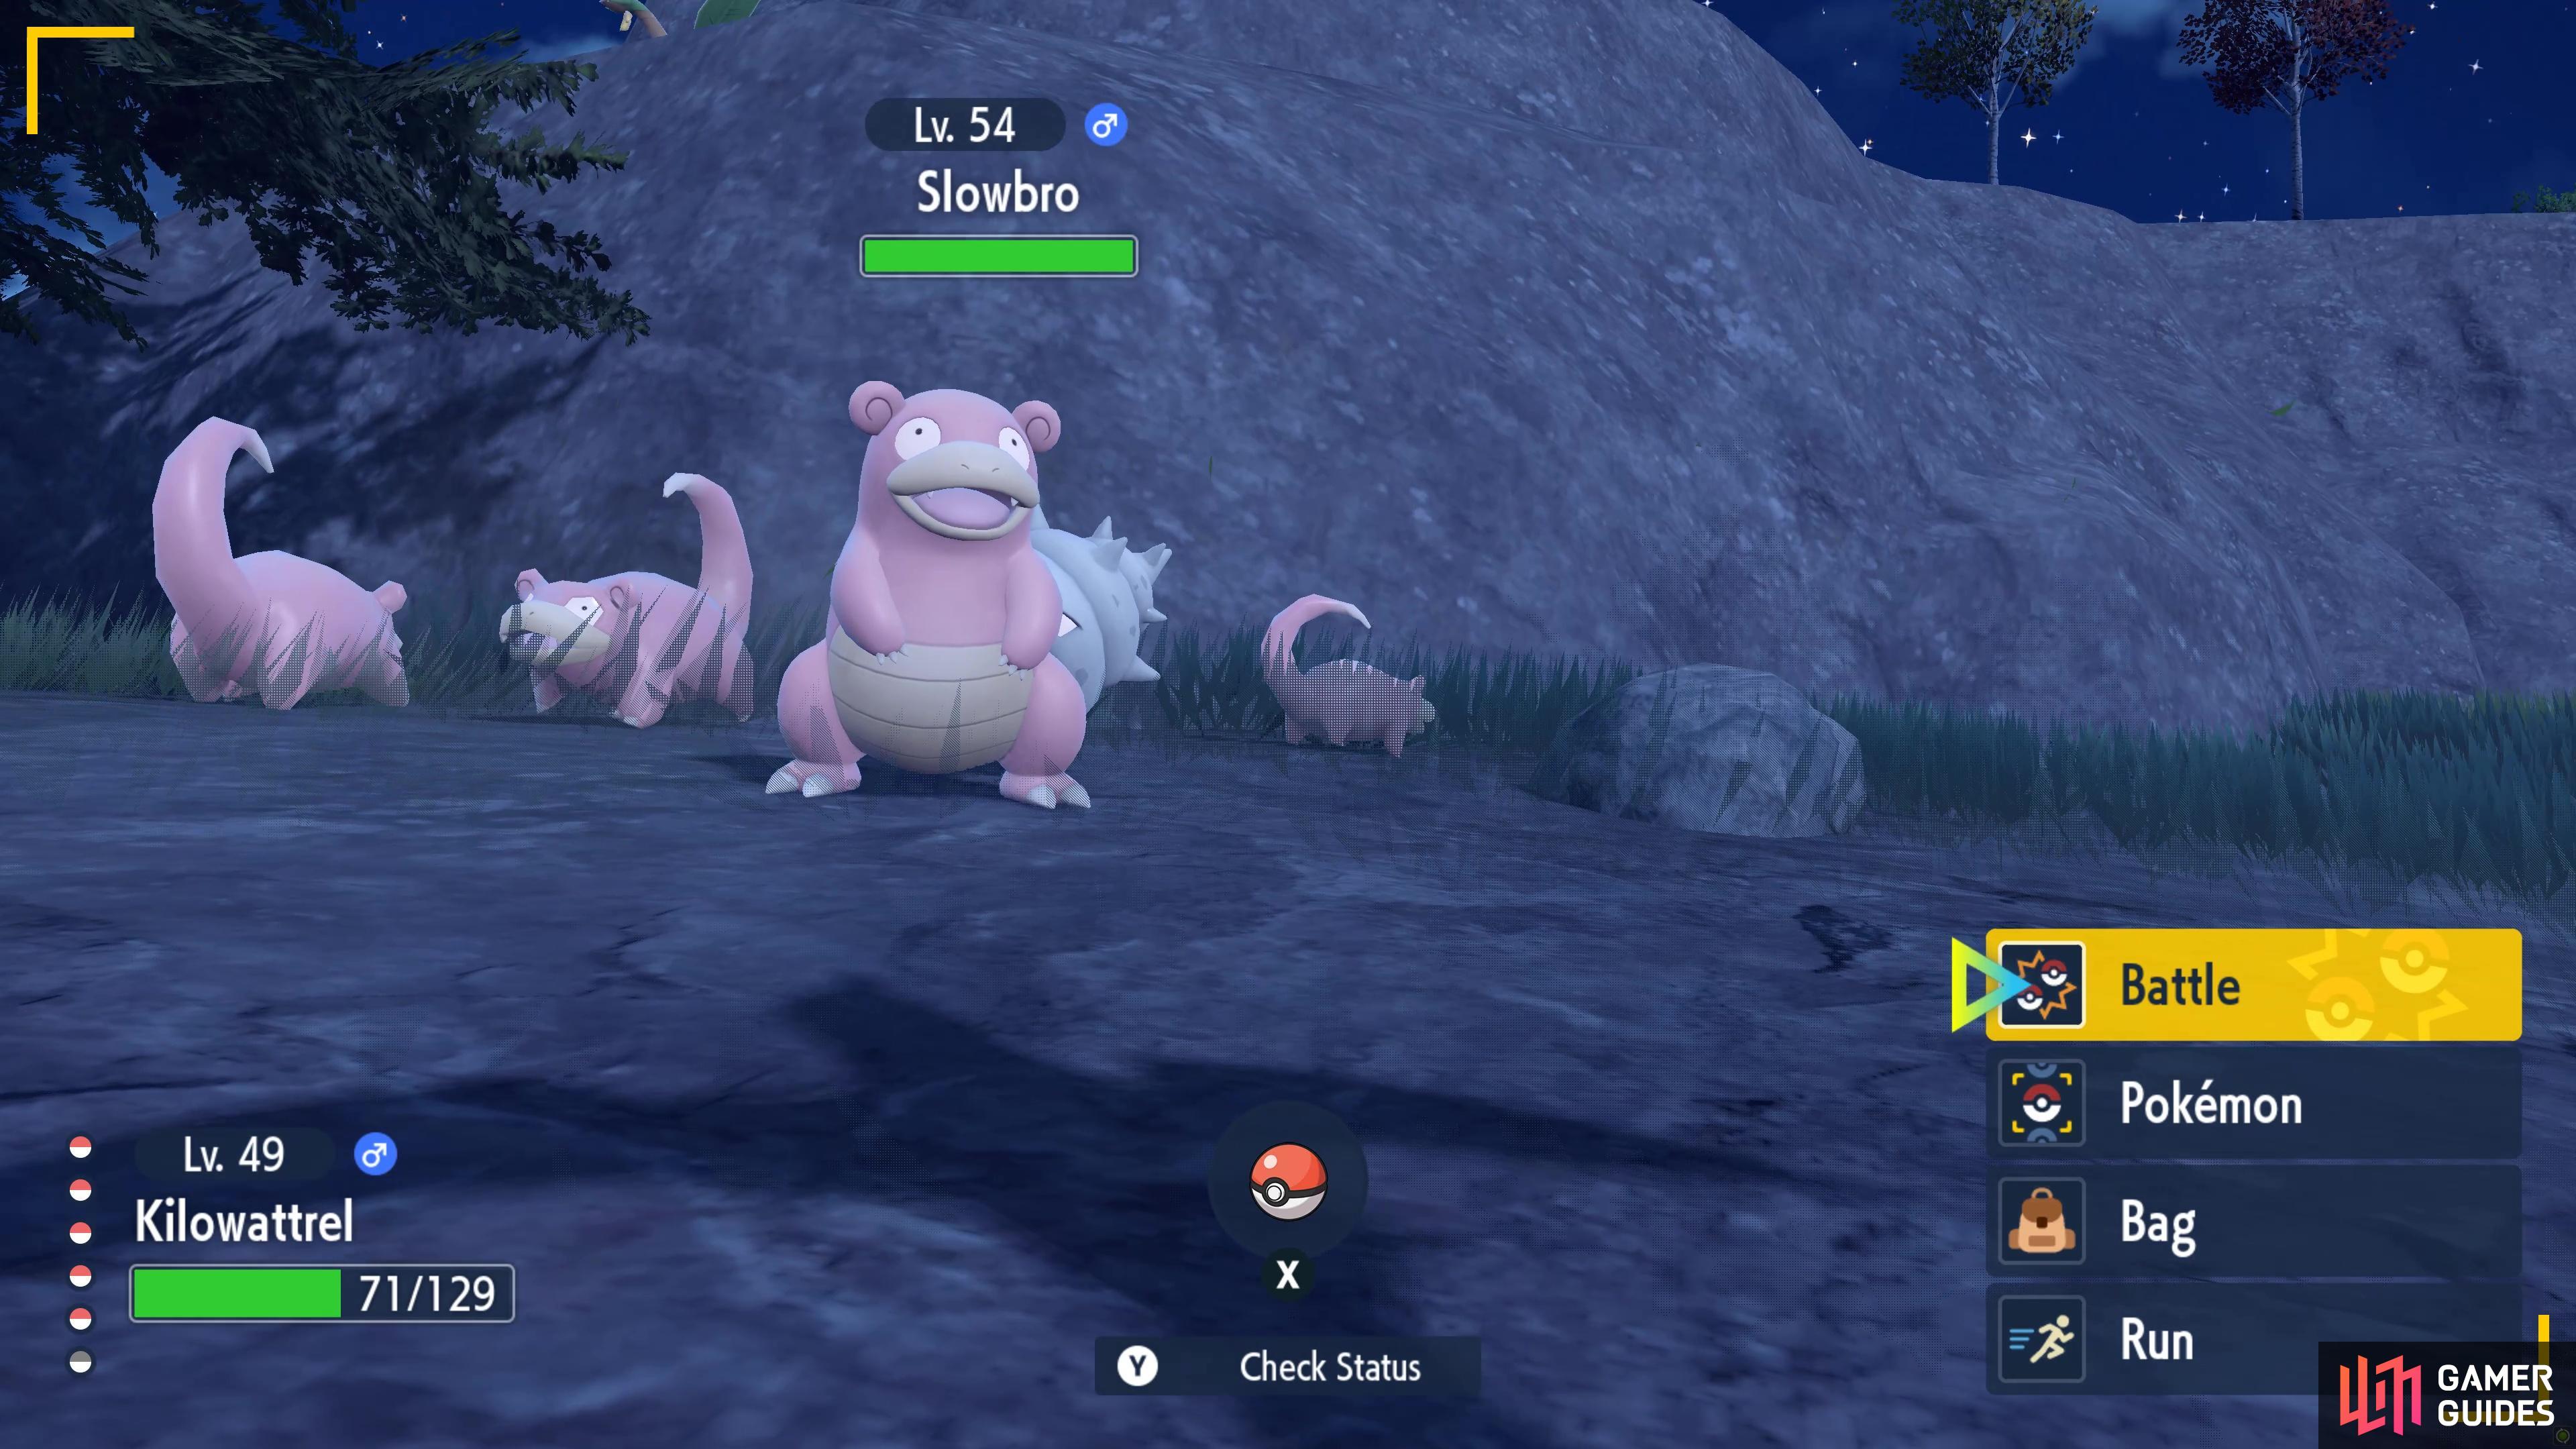 Slowbro taking it easy next to a lake in Pokémon Scarlet and Violet